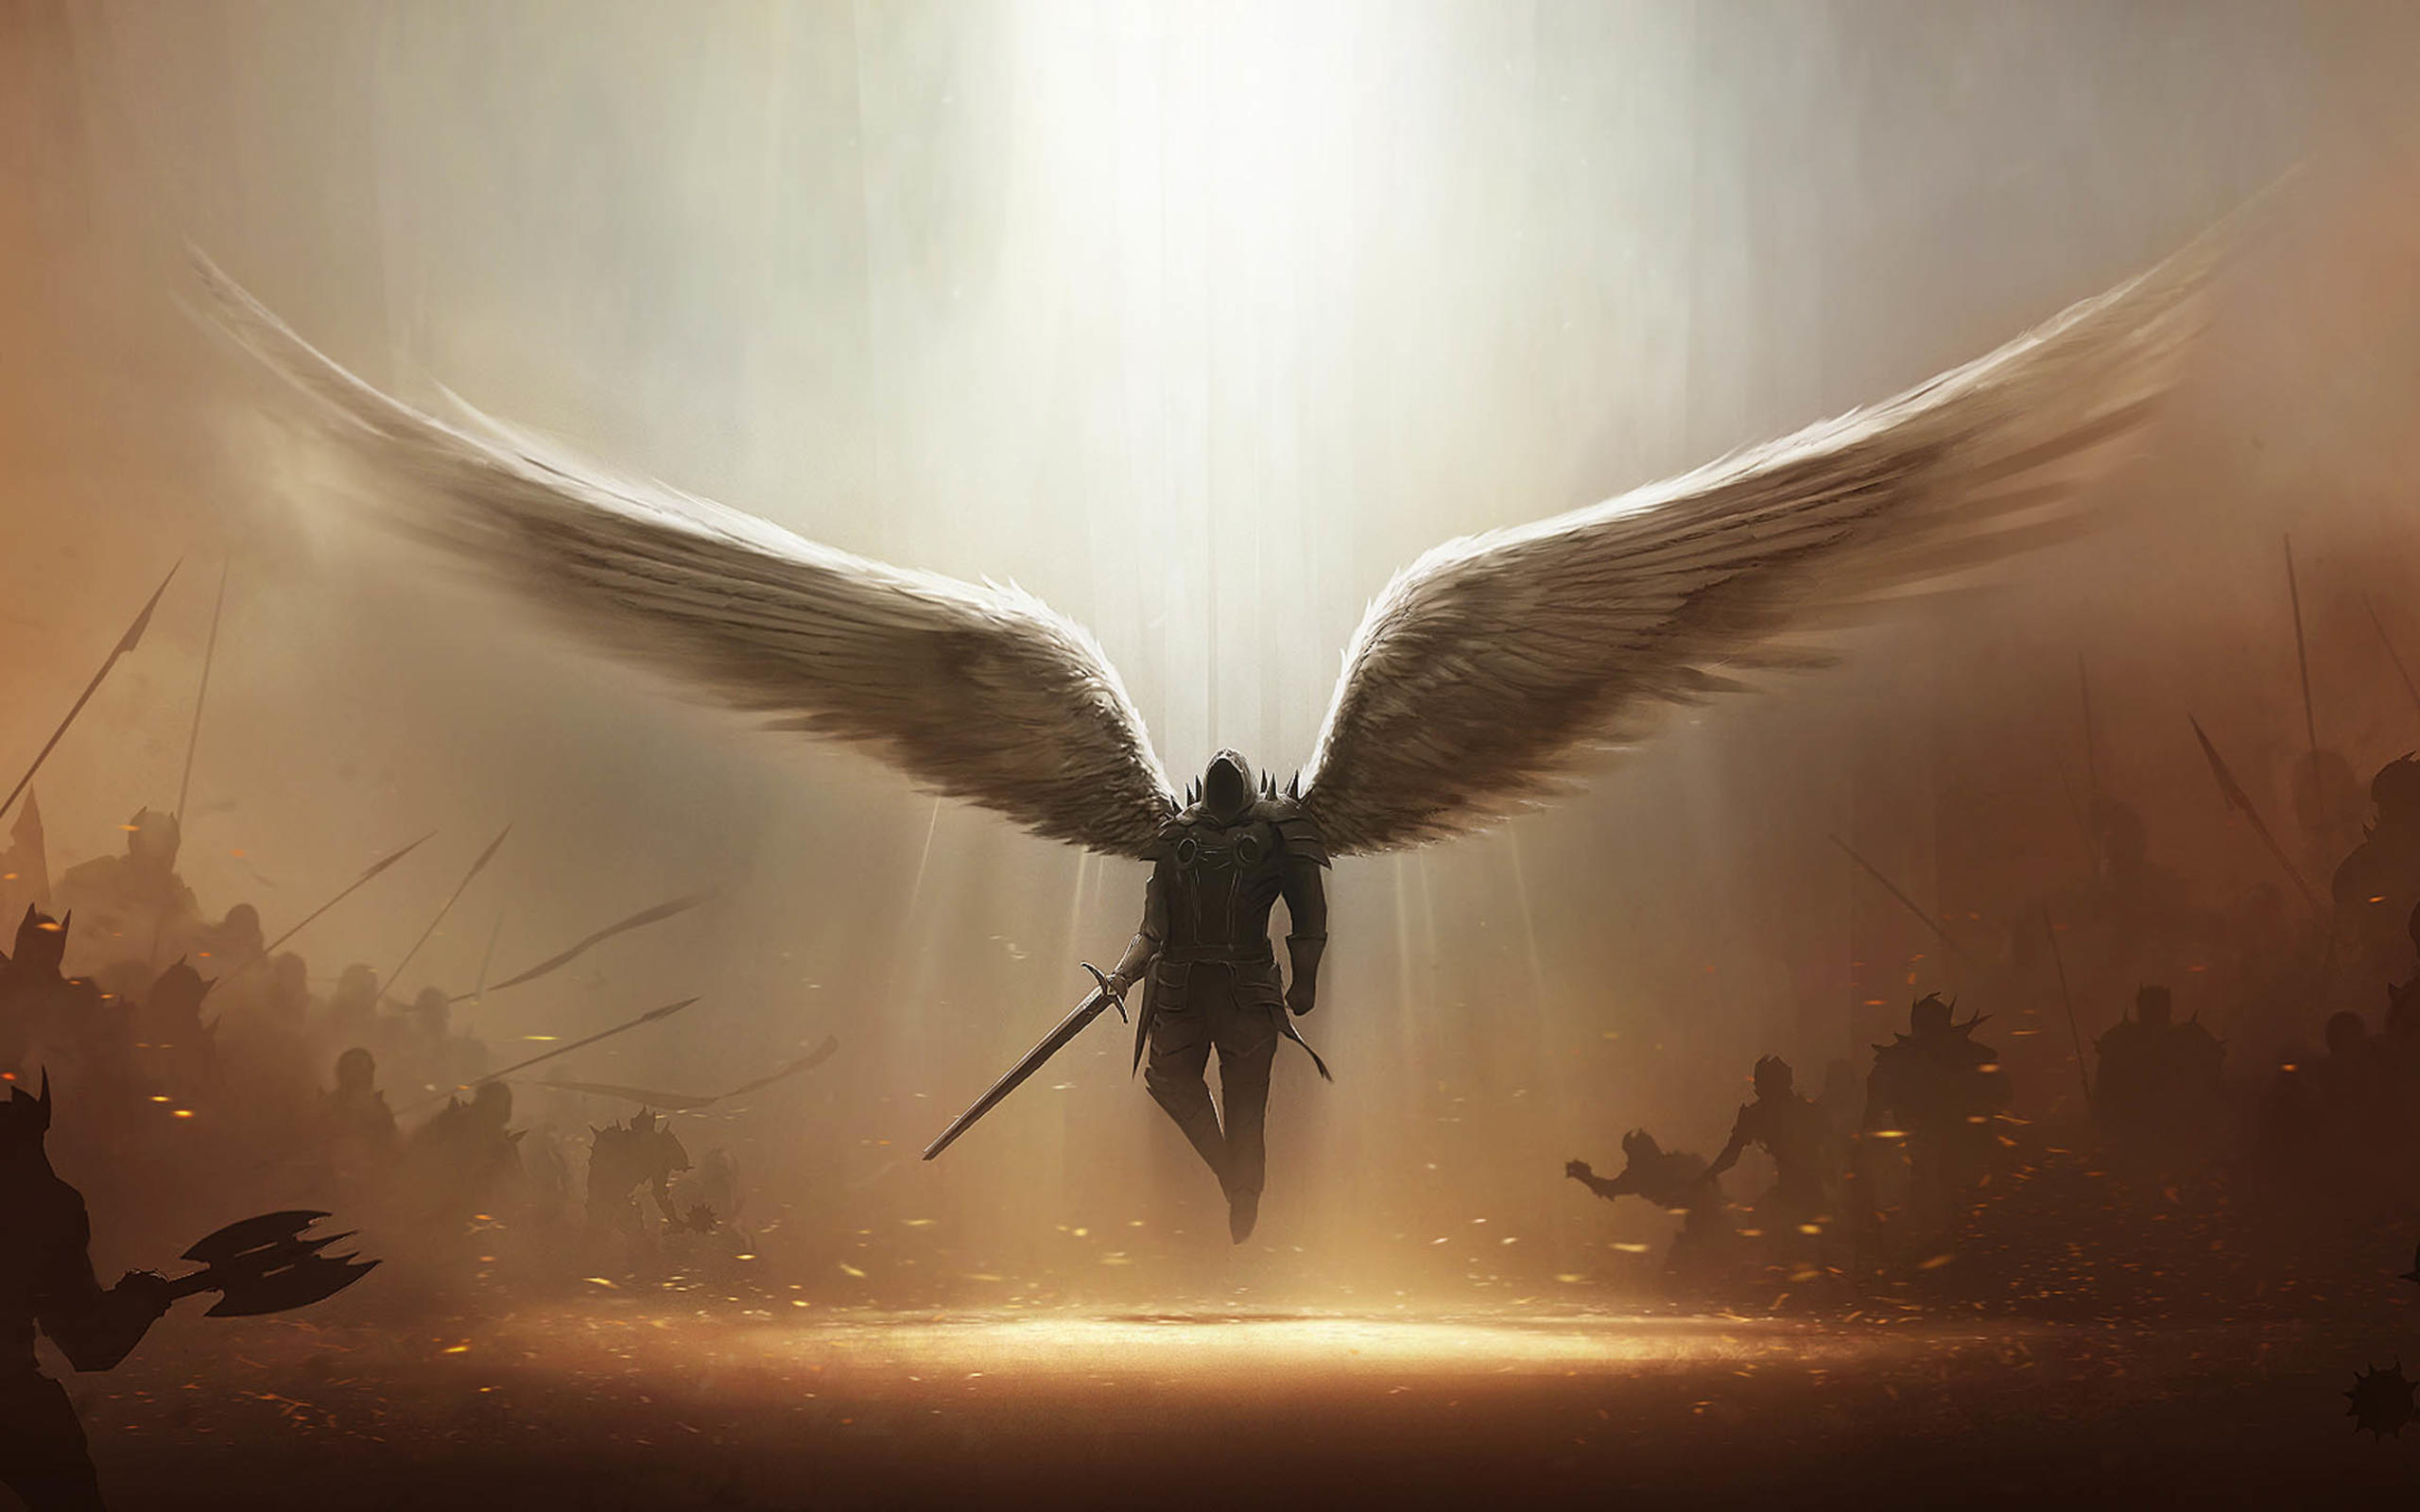 Tyrael, the angel warrior from Diablo III, stands against a fiery backdrop, his majestic wings spread wide.